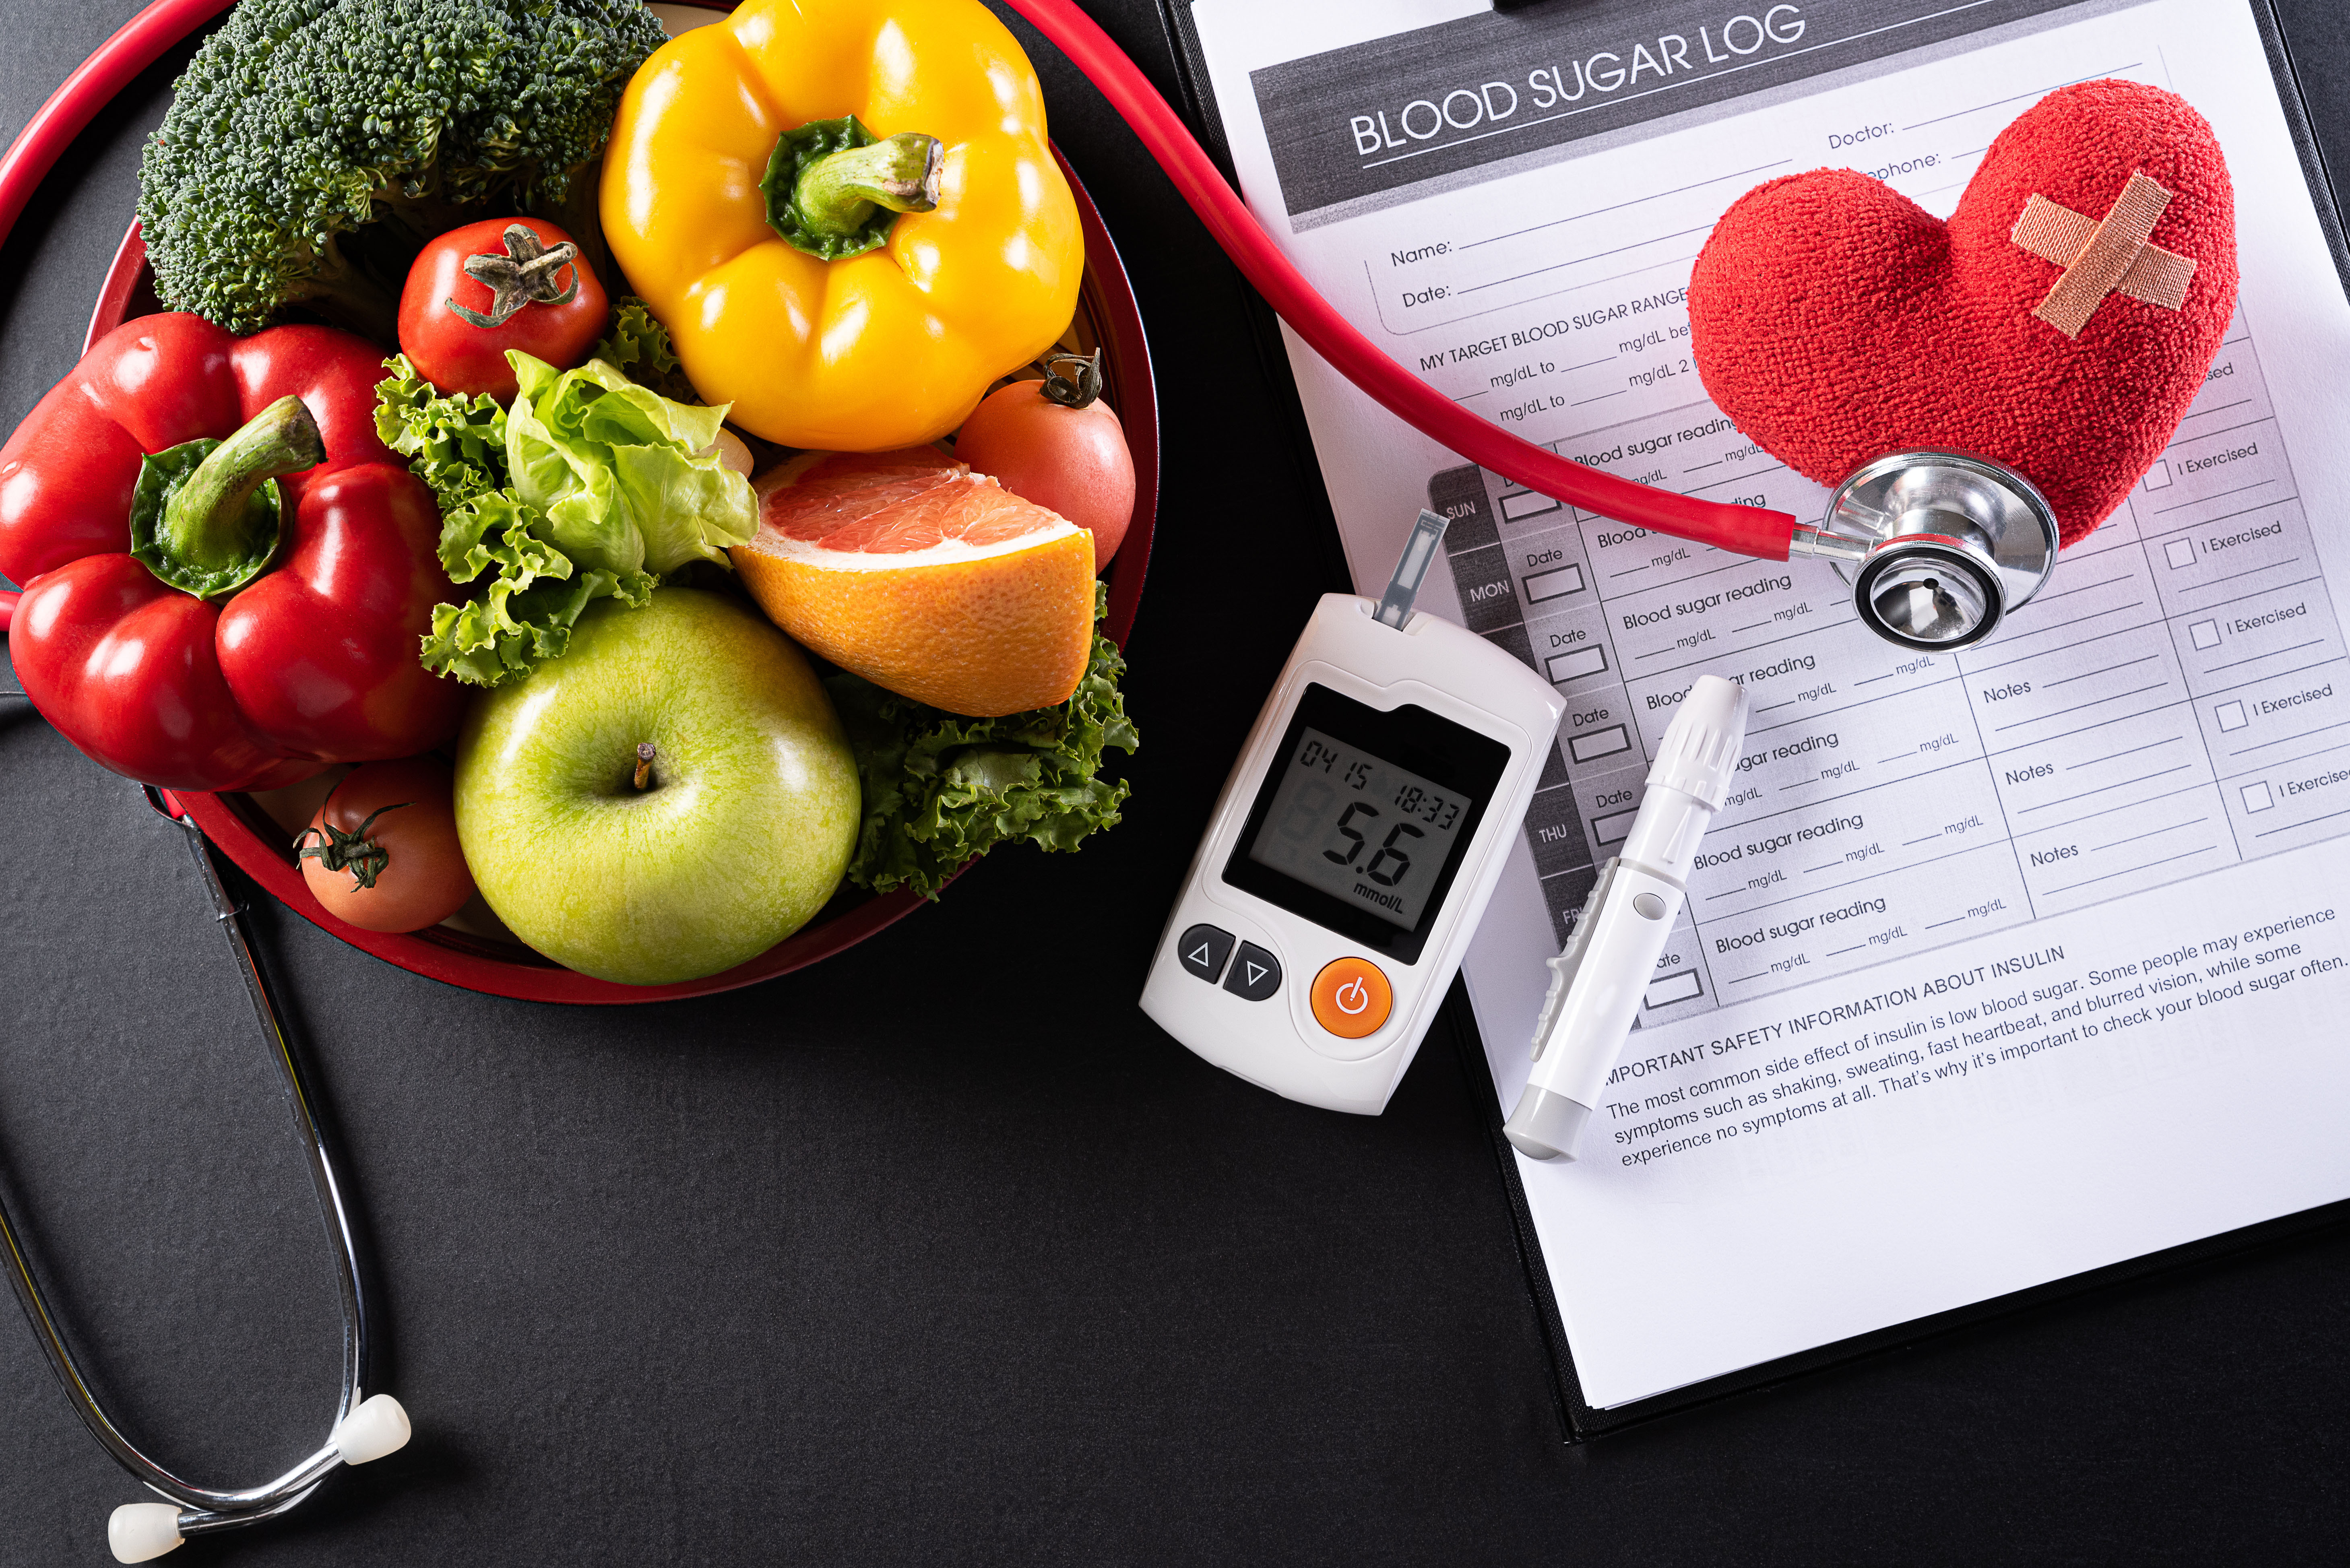 Fruits, vegetables, and a blood sugar monitor